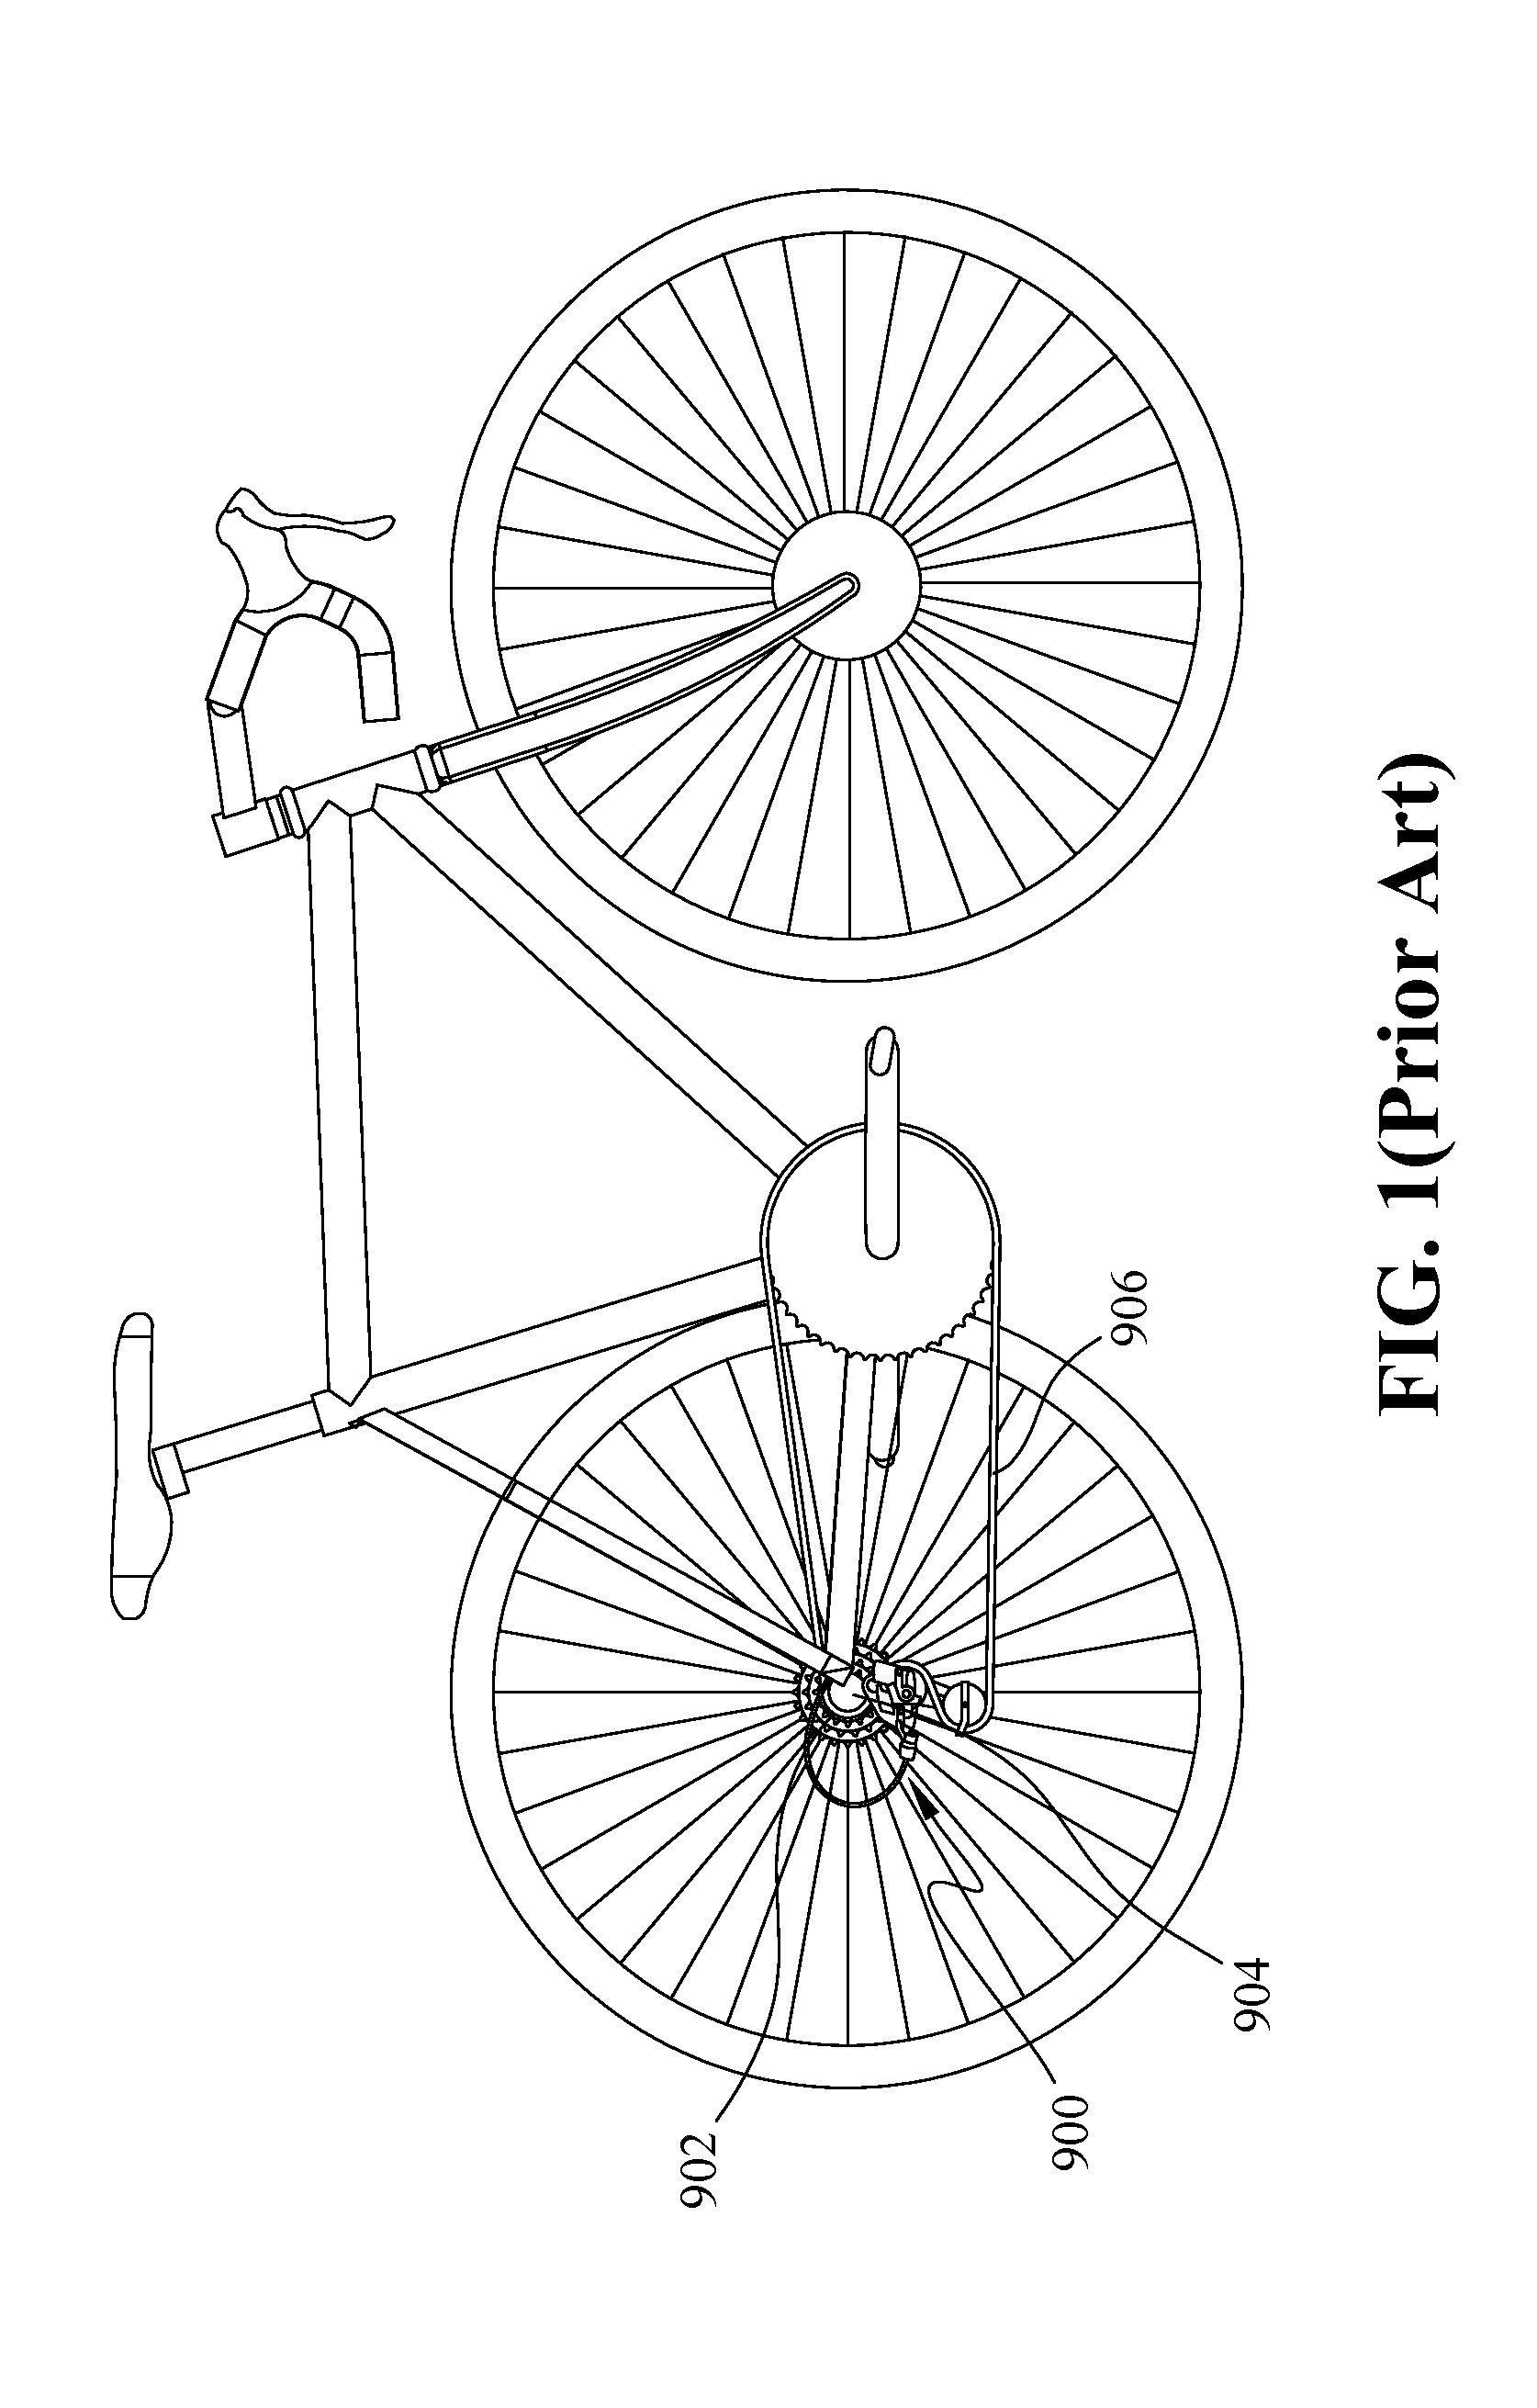 Multi-Ratio Transmission System with Parallel Vertical and Coaxial Planet Gears